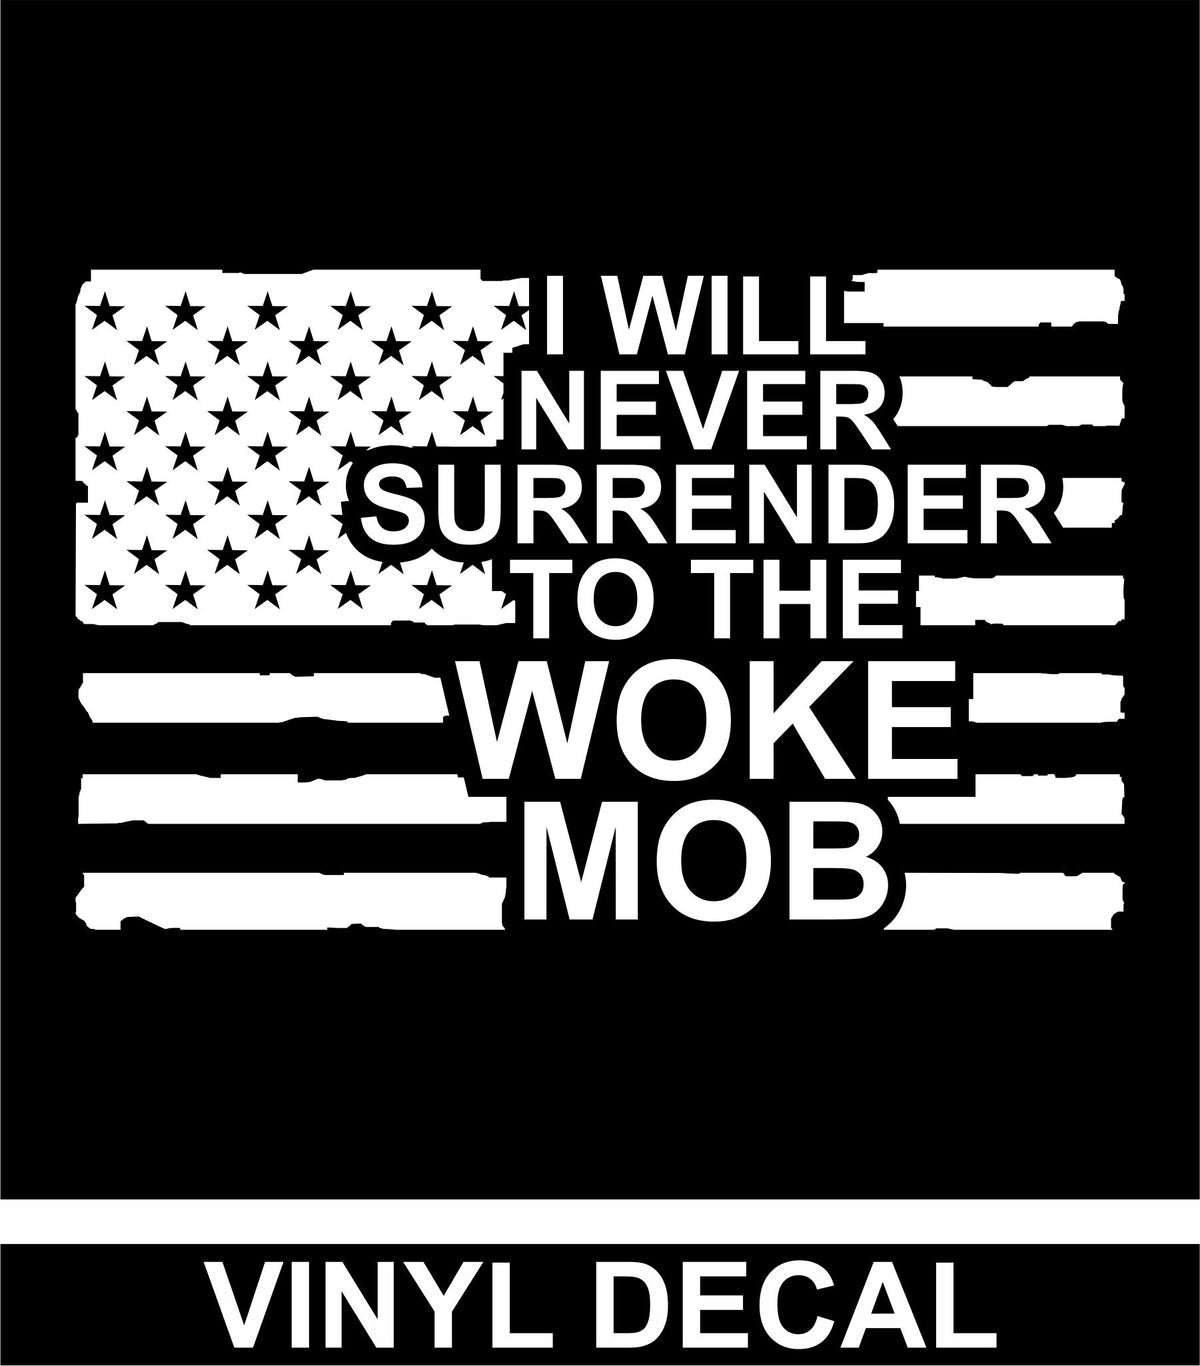 I Will Never Surrender to the Woke Mob - Vinyl Decal - Free Shipping